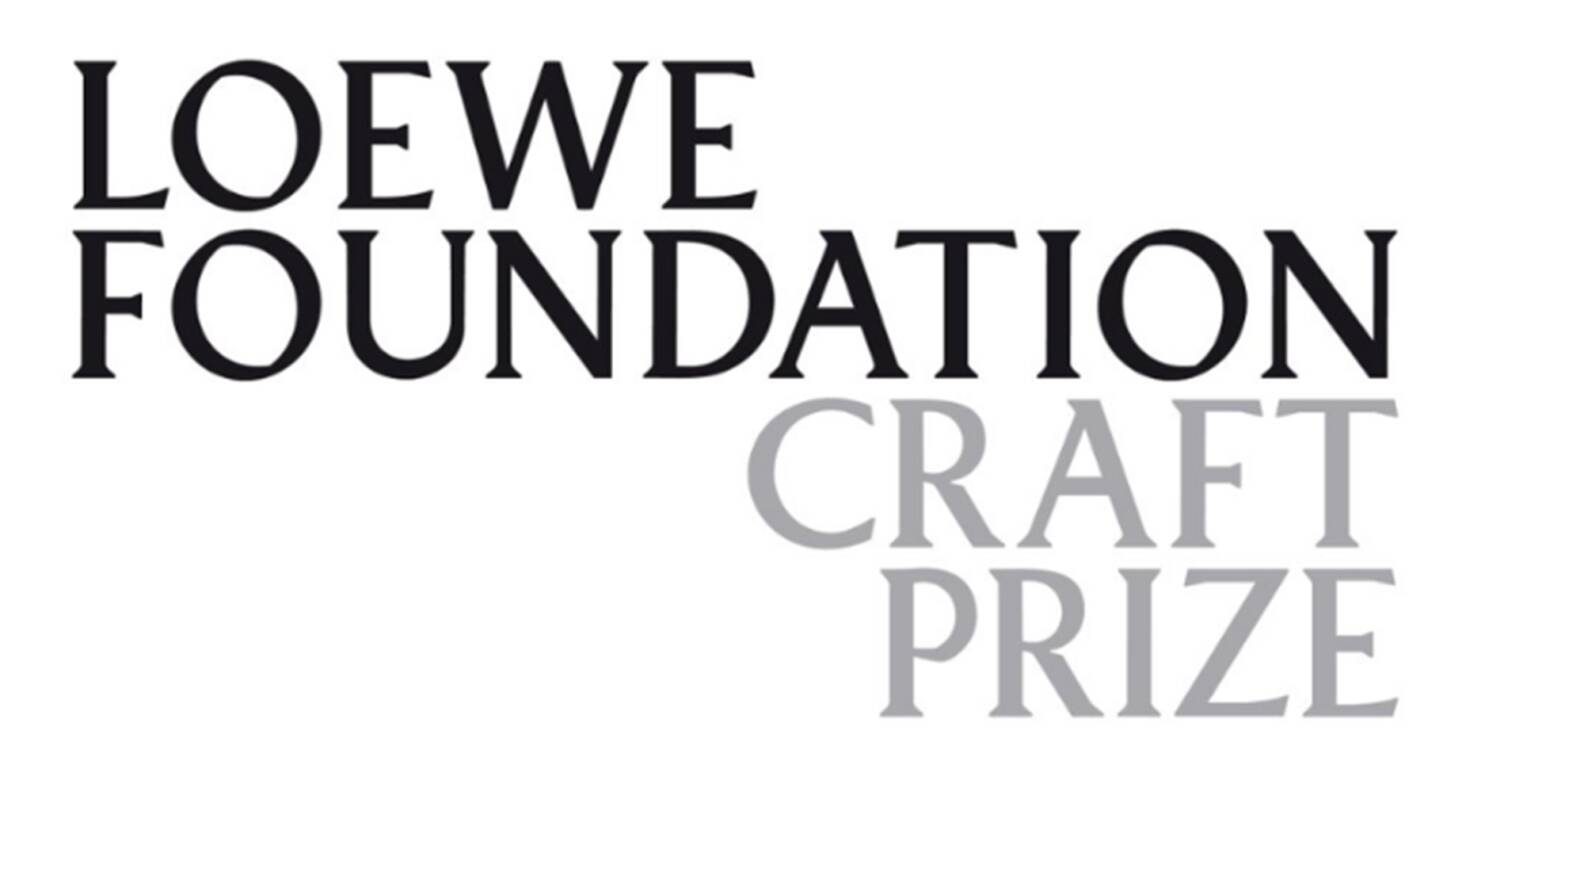 Loewe launches Craft Prize - LVMH